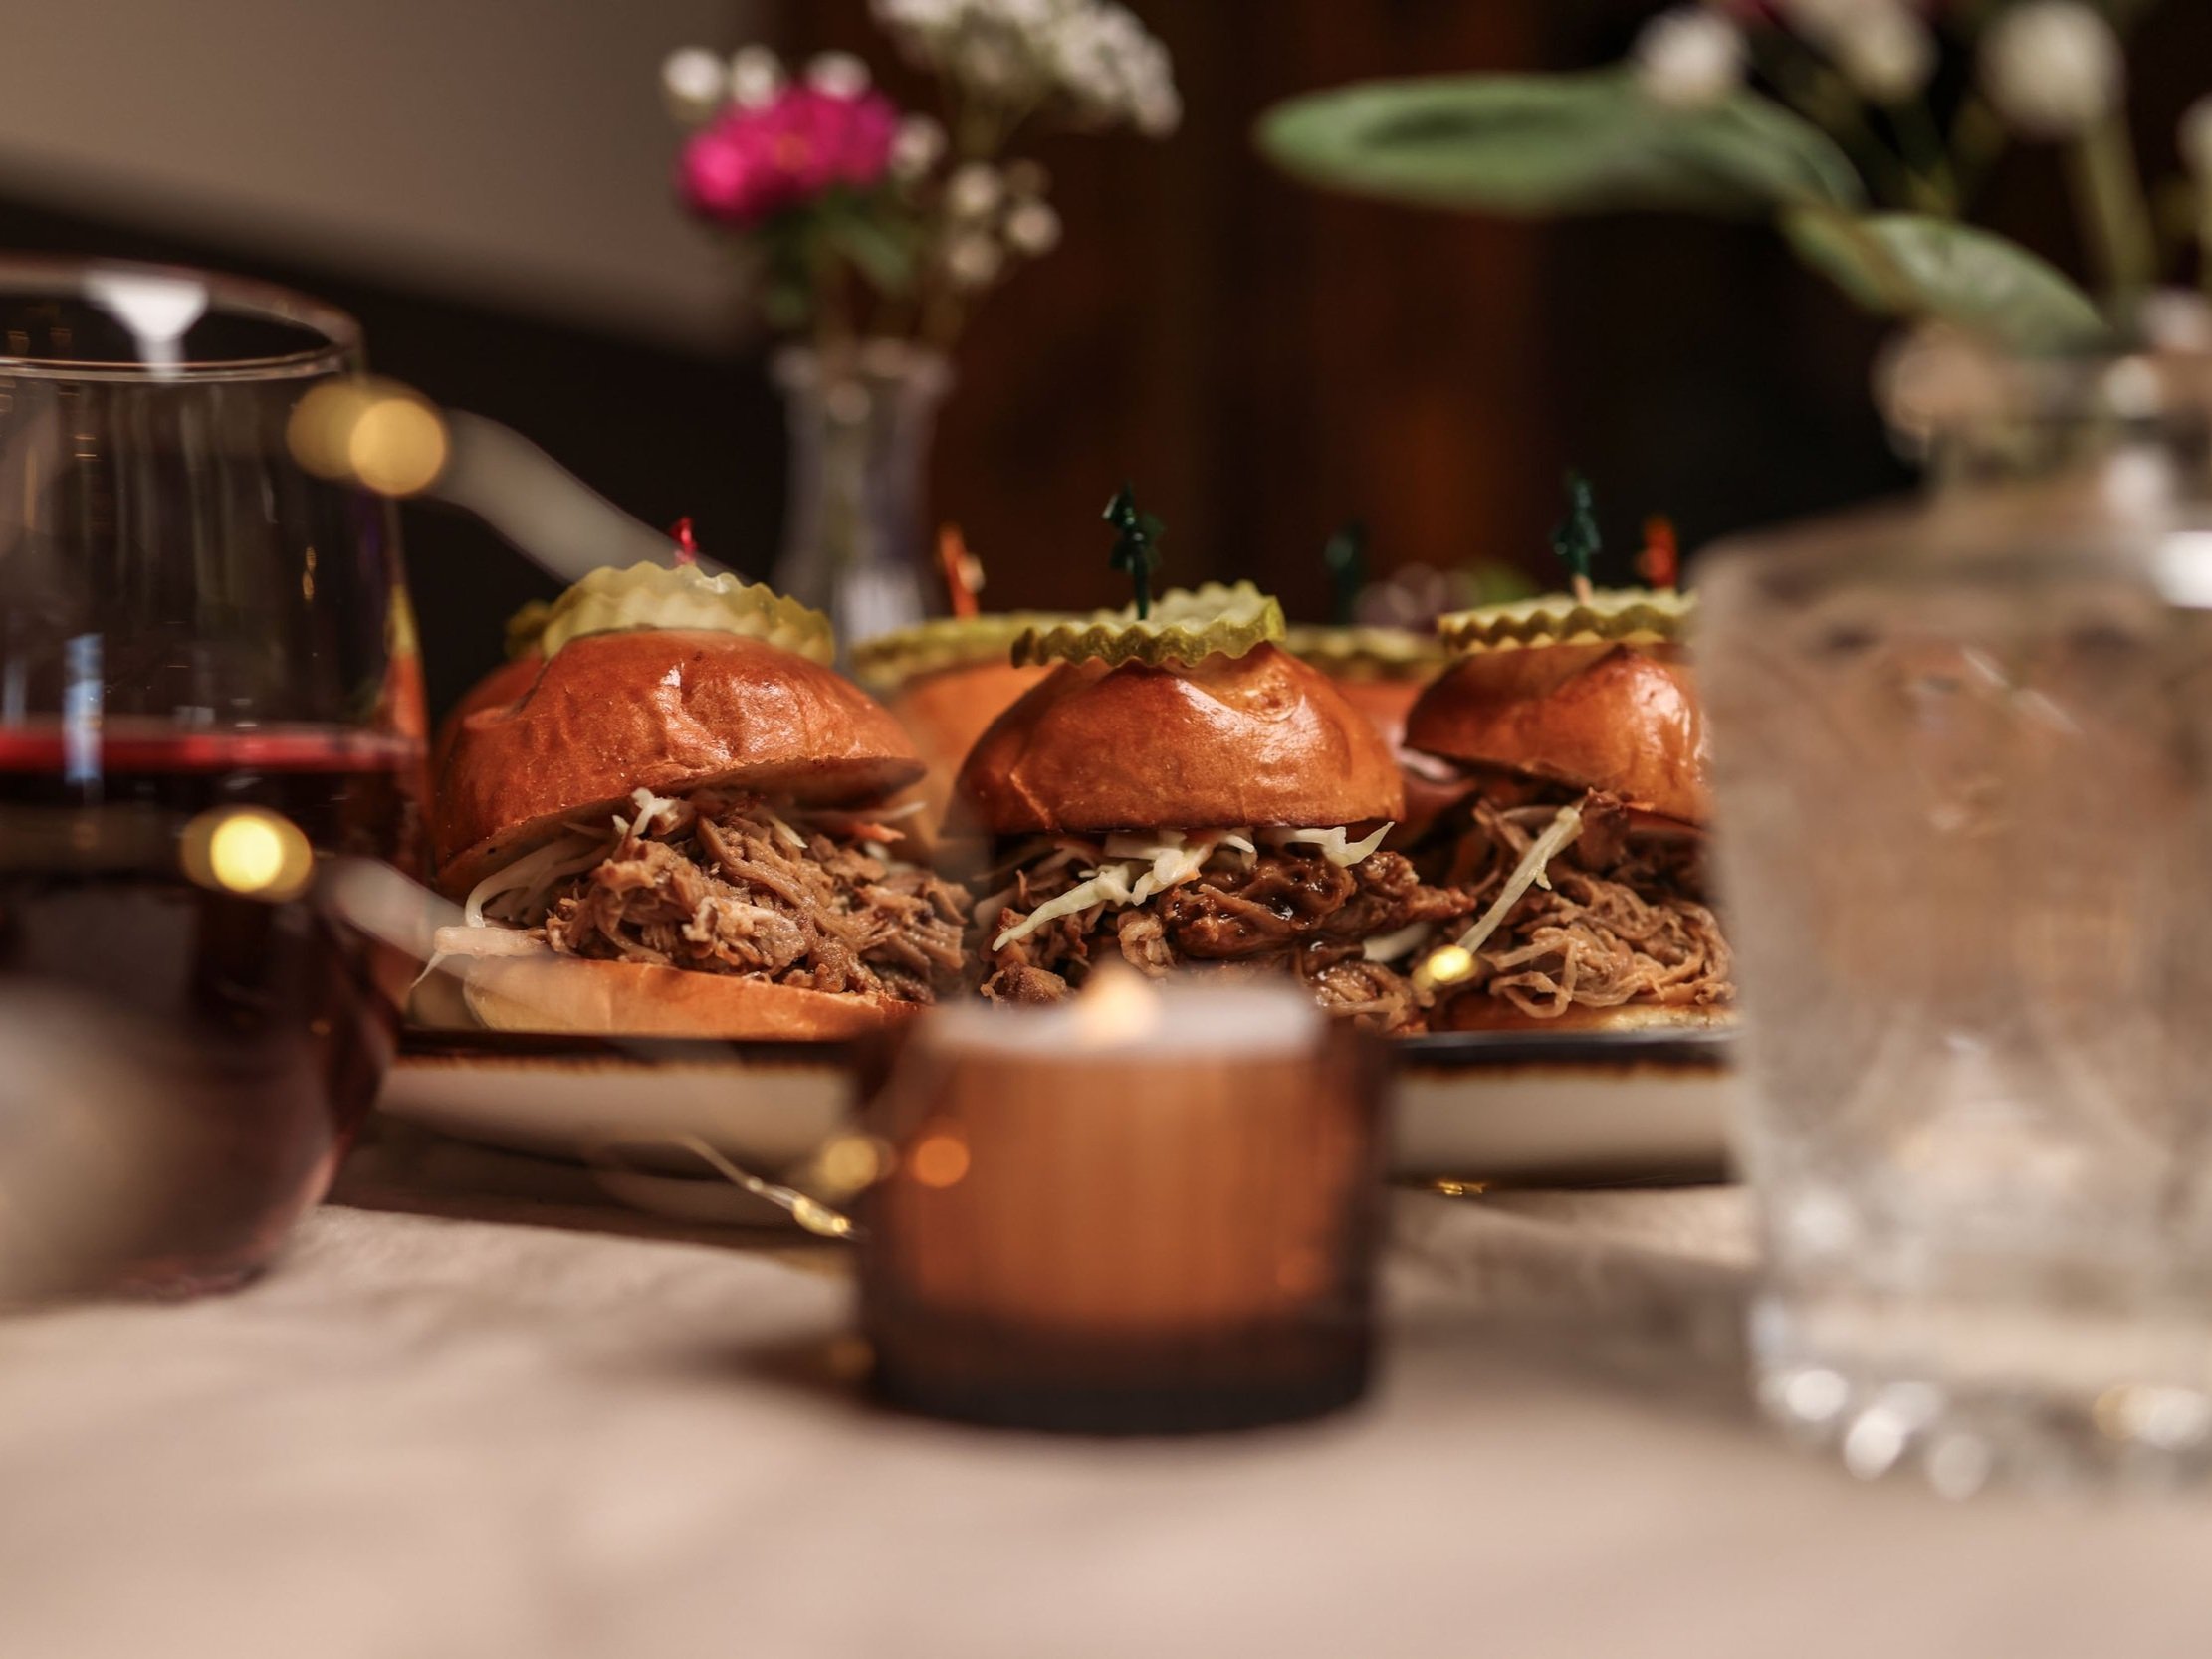  Close-up of pulled pork sandwiches on a table adorned with candles and glasses of red wine, creating an intimate dining atmosphere. 